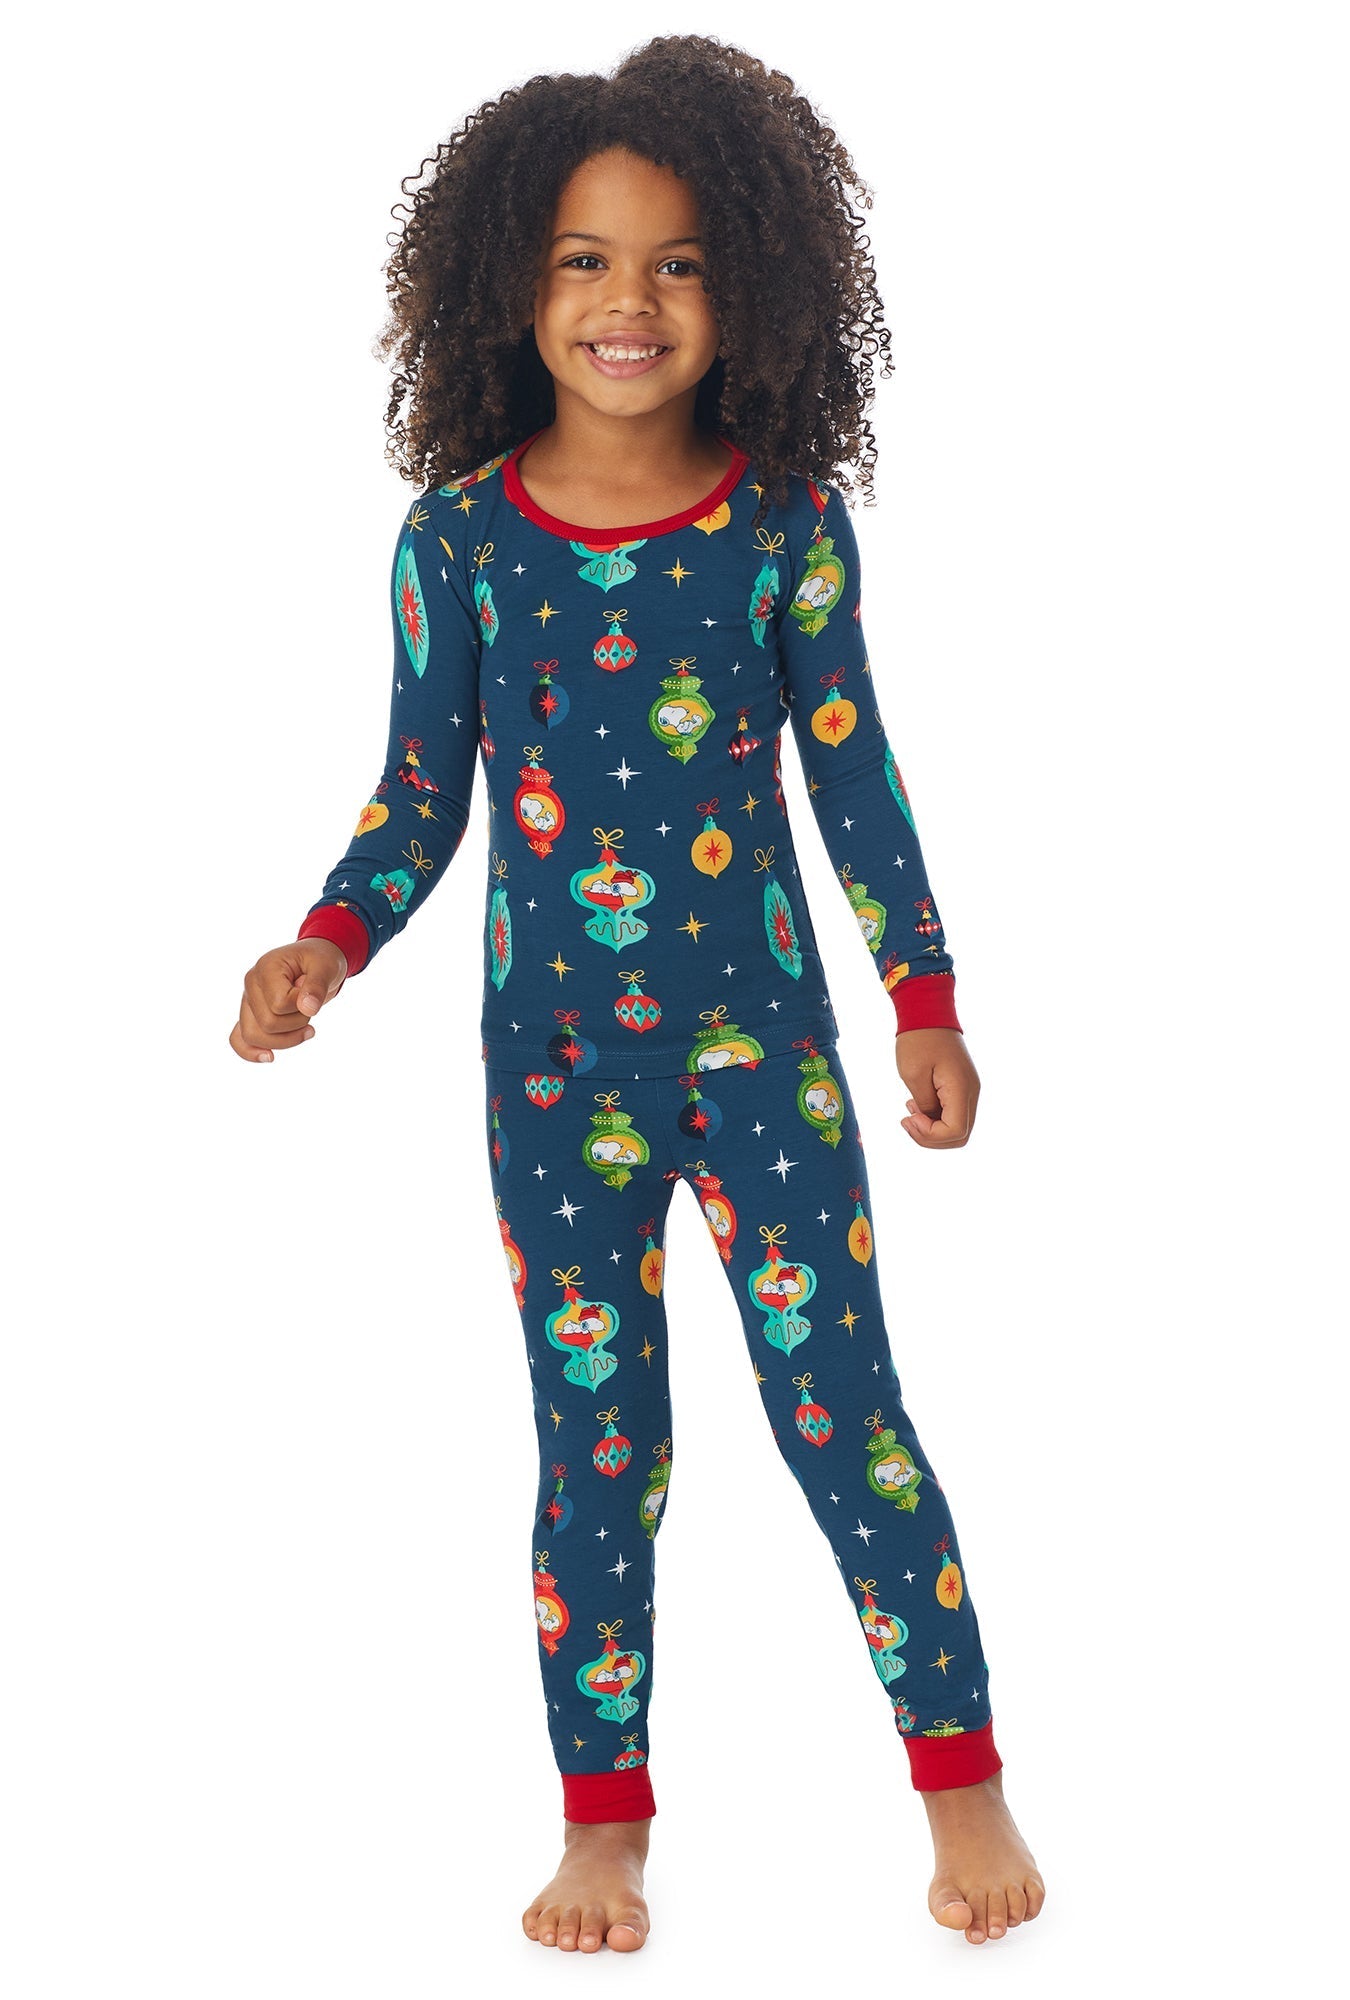 A girl wearing a blue long sleeve pj set with snoopy ornaments pattern.